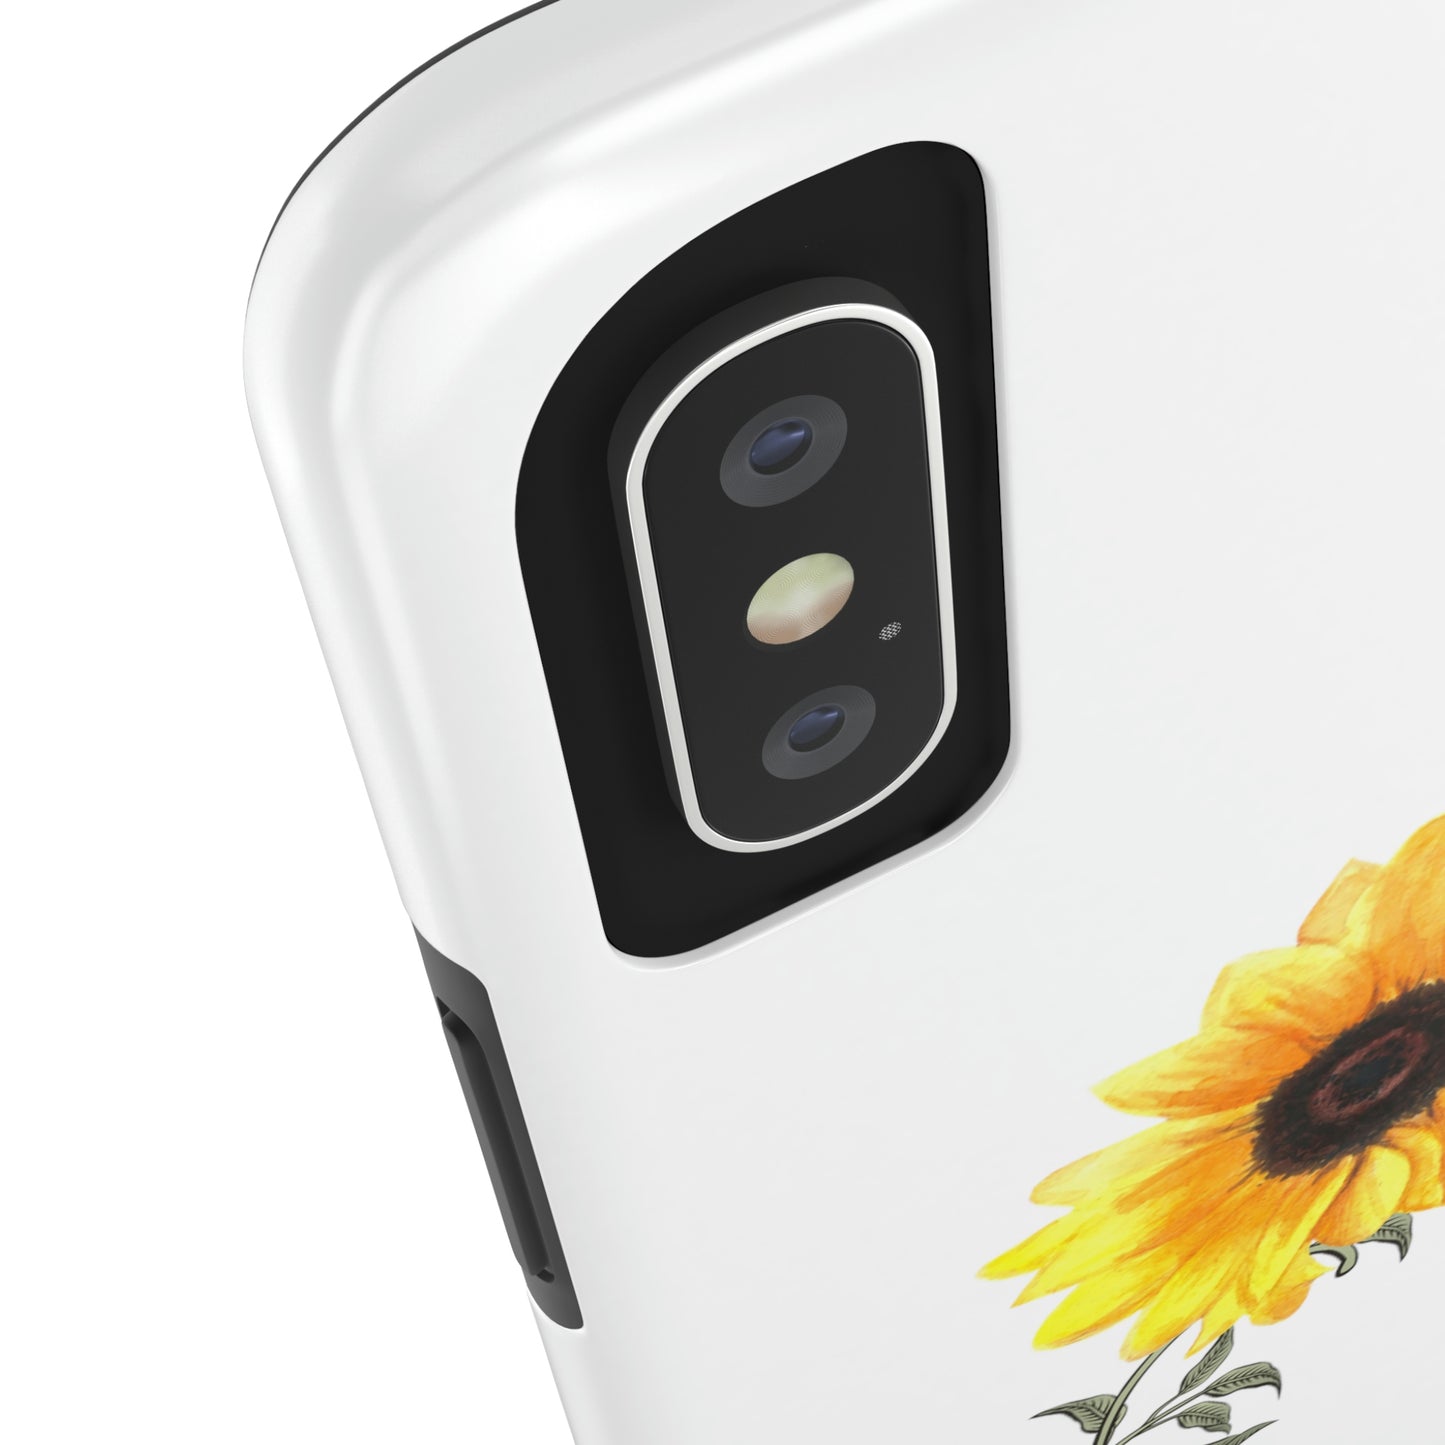 Personalized Sunflower Phone Case